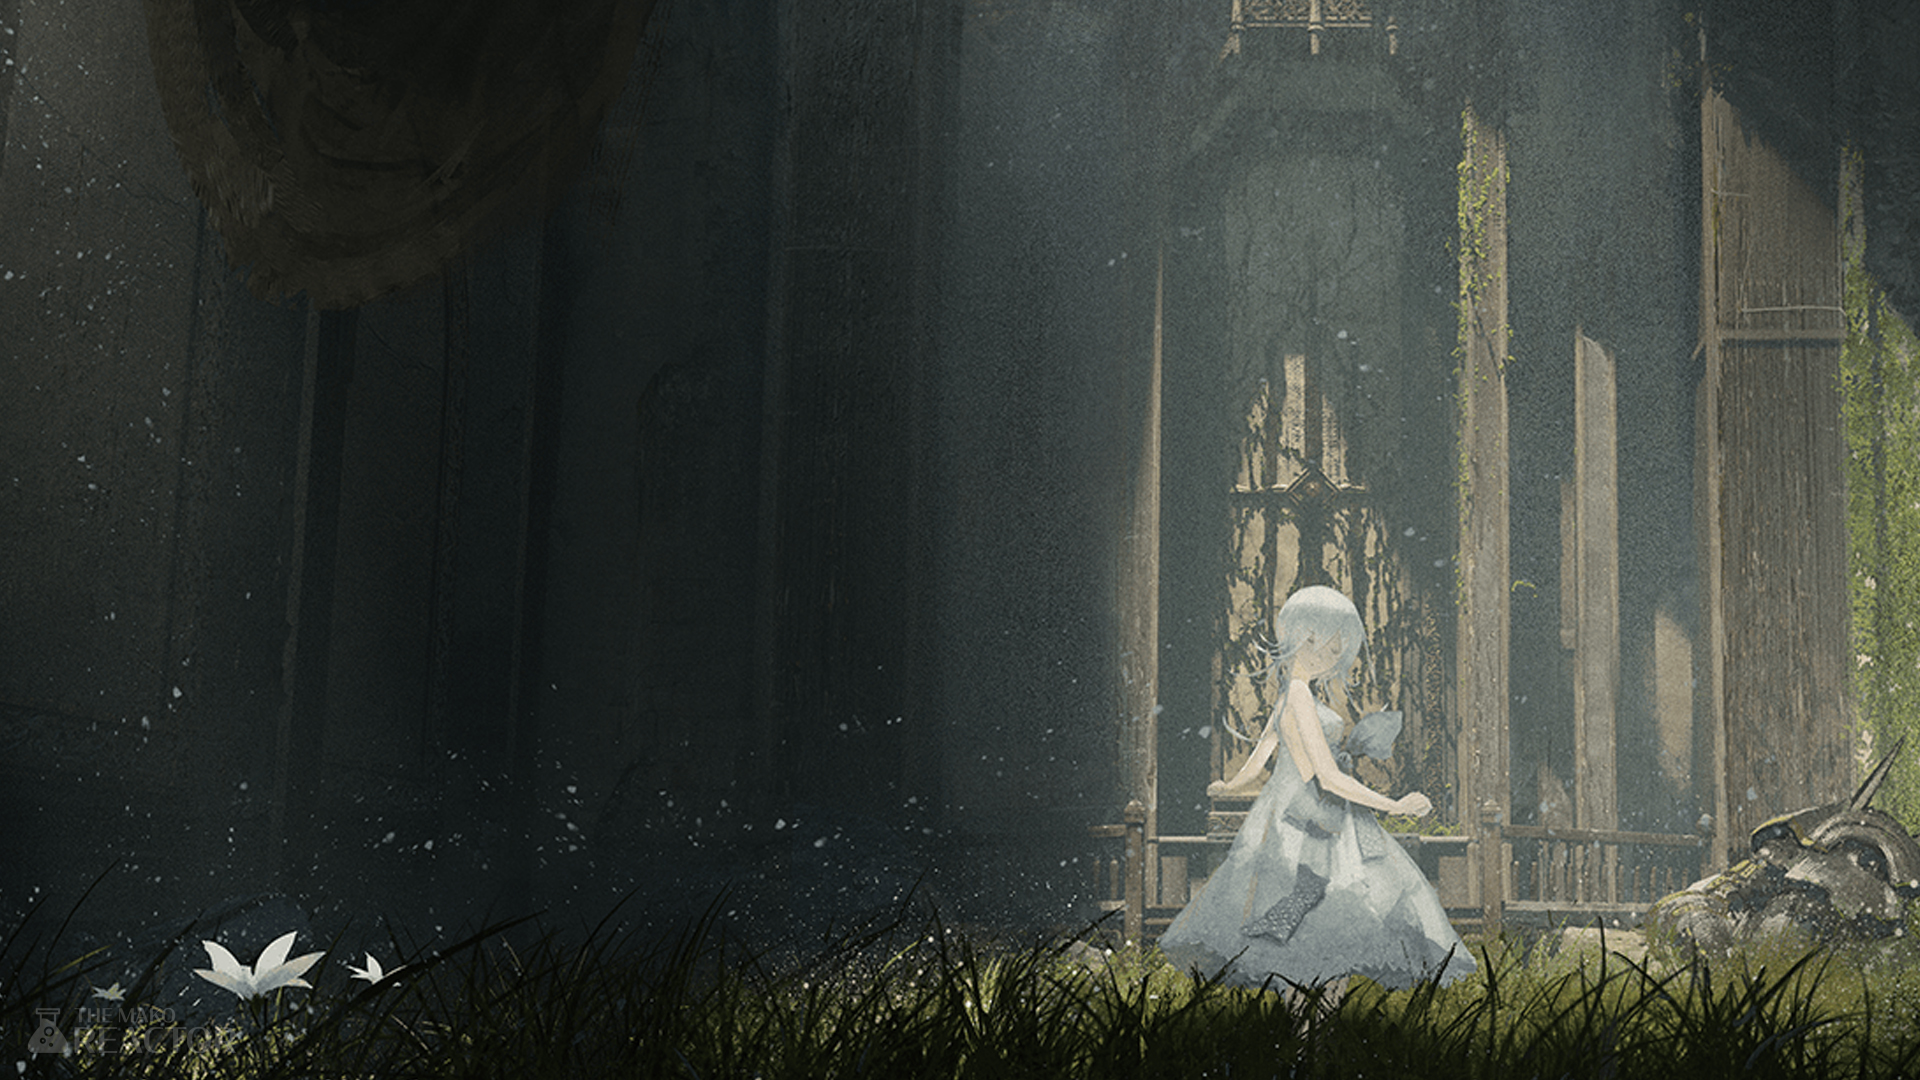 IGN India on Twitter Its Wallpaper Wednesday This weeks featured game  is Nier Replicant ver 122474487139 Check out mobile wallpapers here  httpstcoZIsdwgiUX1 NieRReplicant httpstco0IuK1JETg2  Twitter